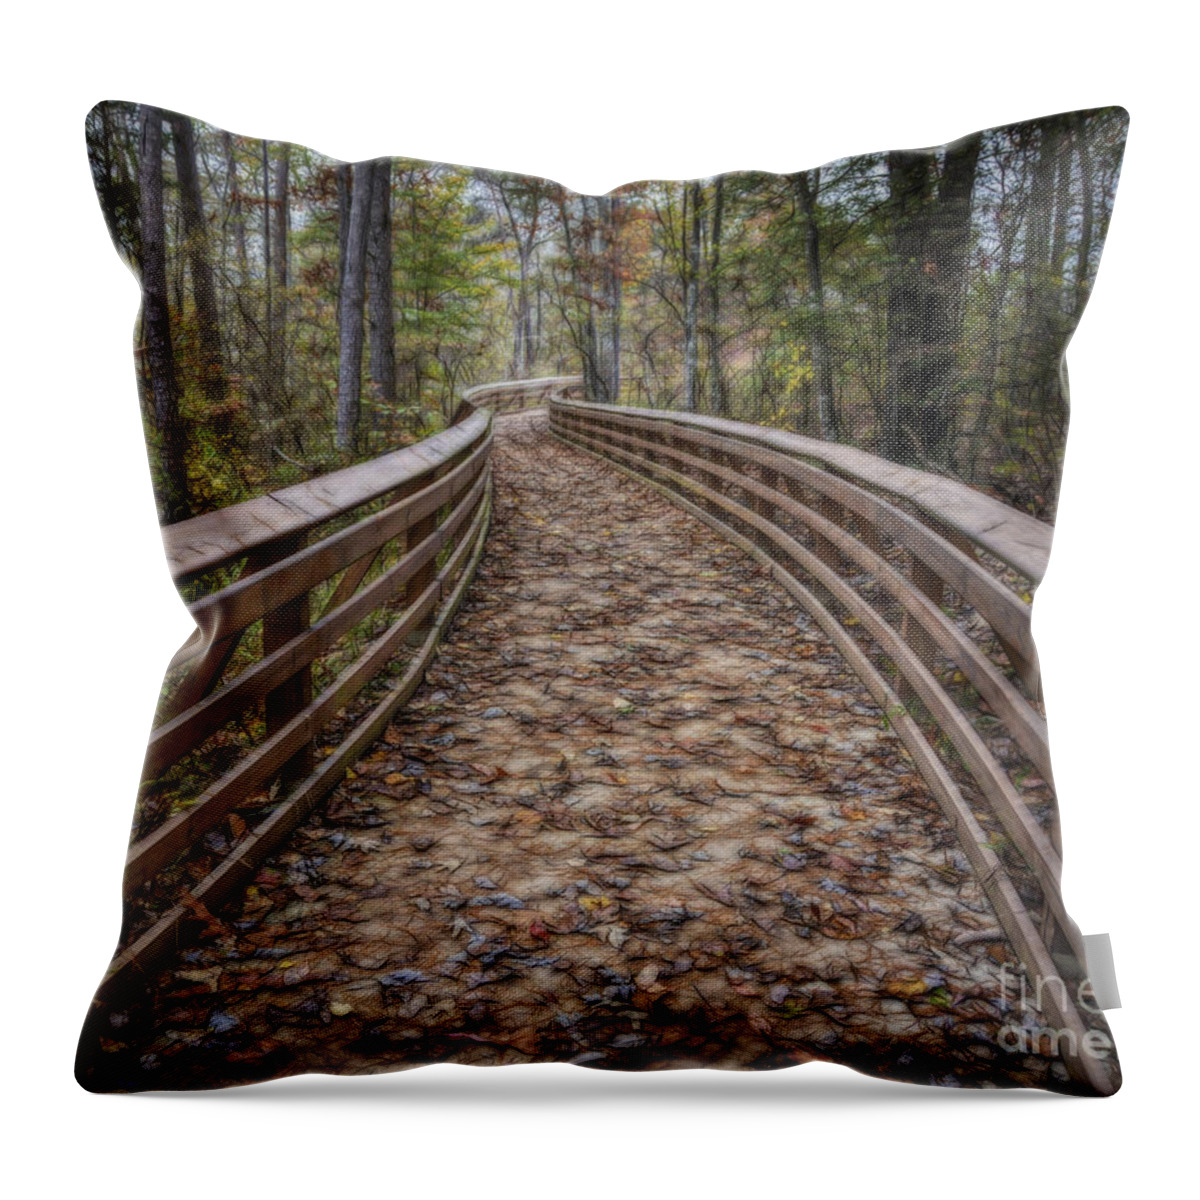 Pathway Throw Pillow featuring the photograph The Path That Leads by Ken Johnson